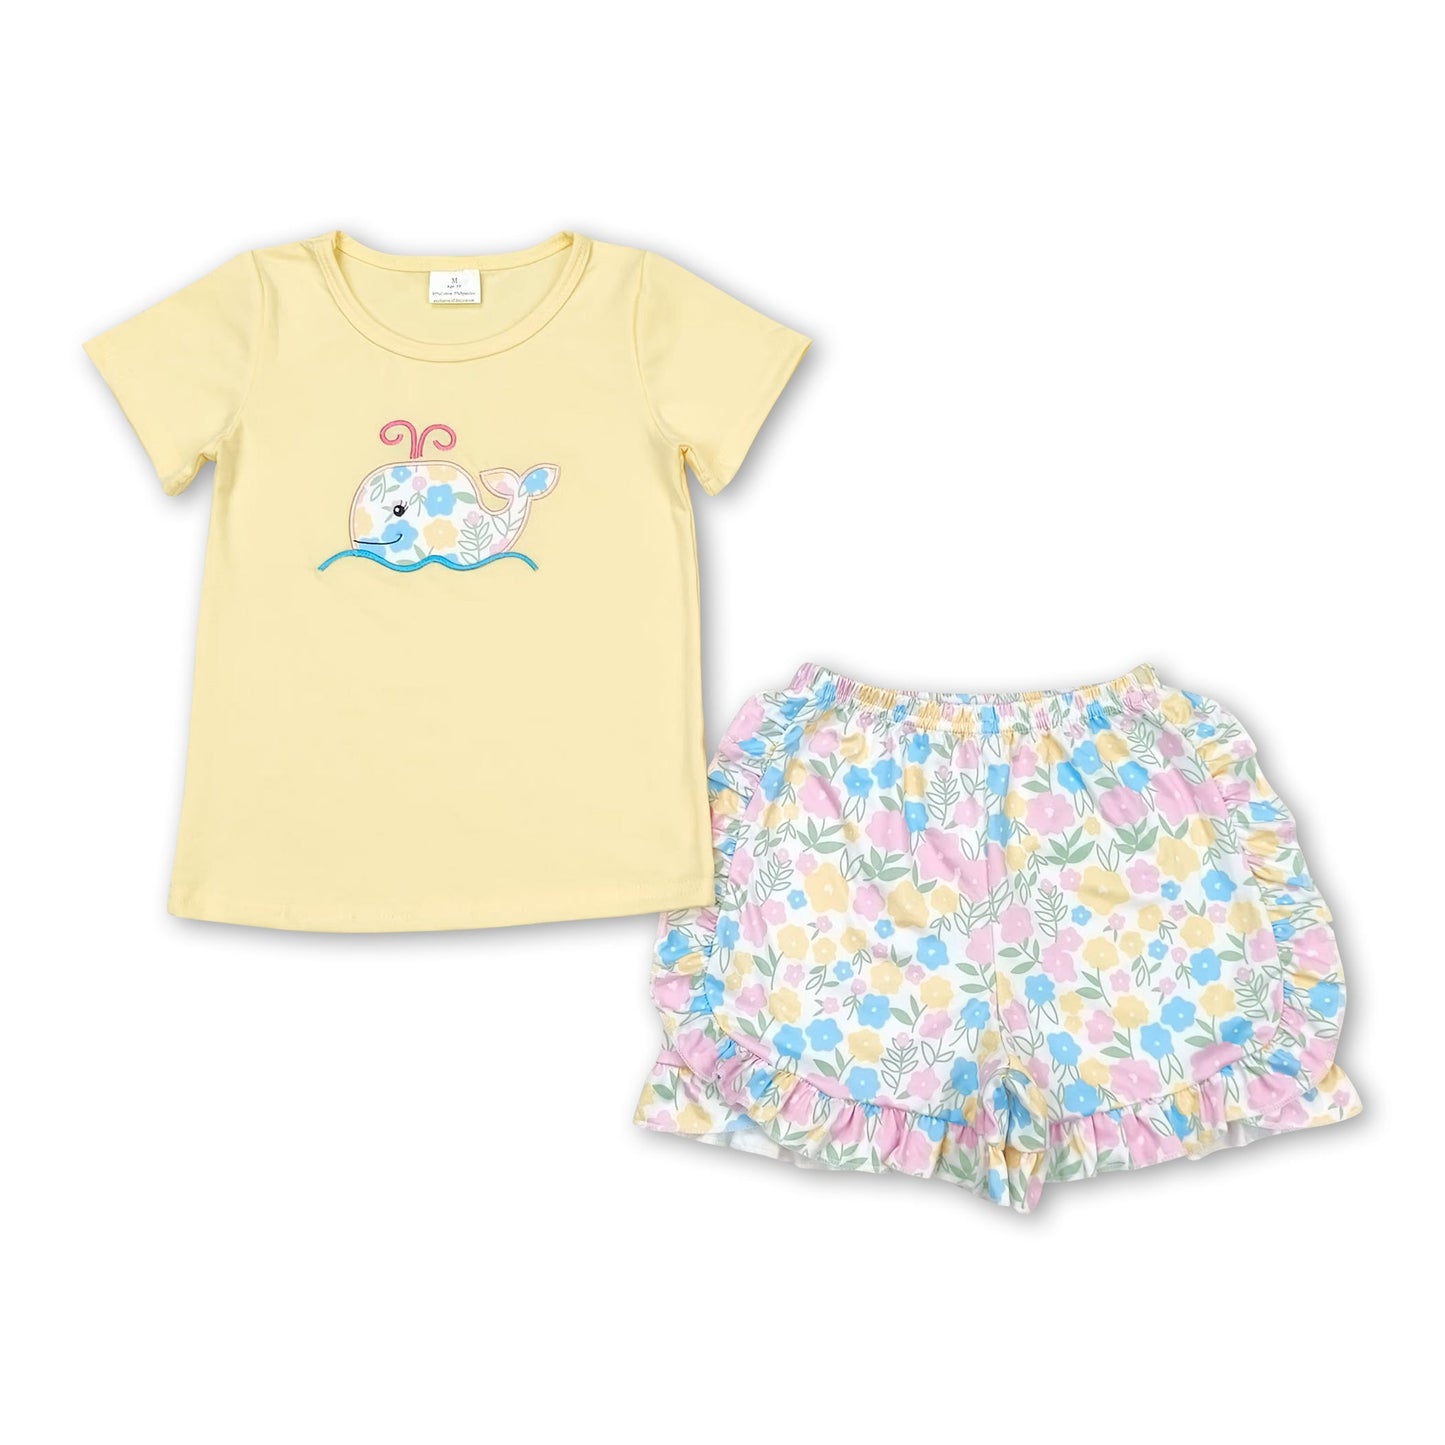 Yellow floral whale top shorts girls summer clothes